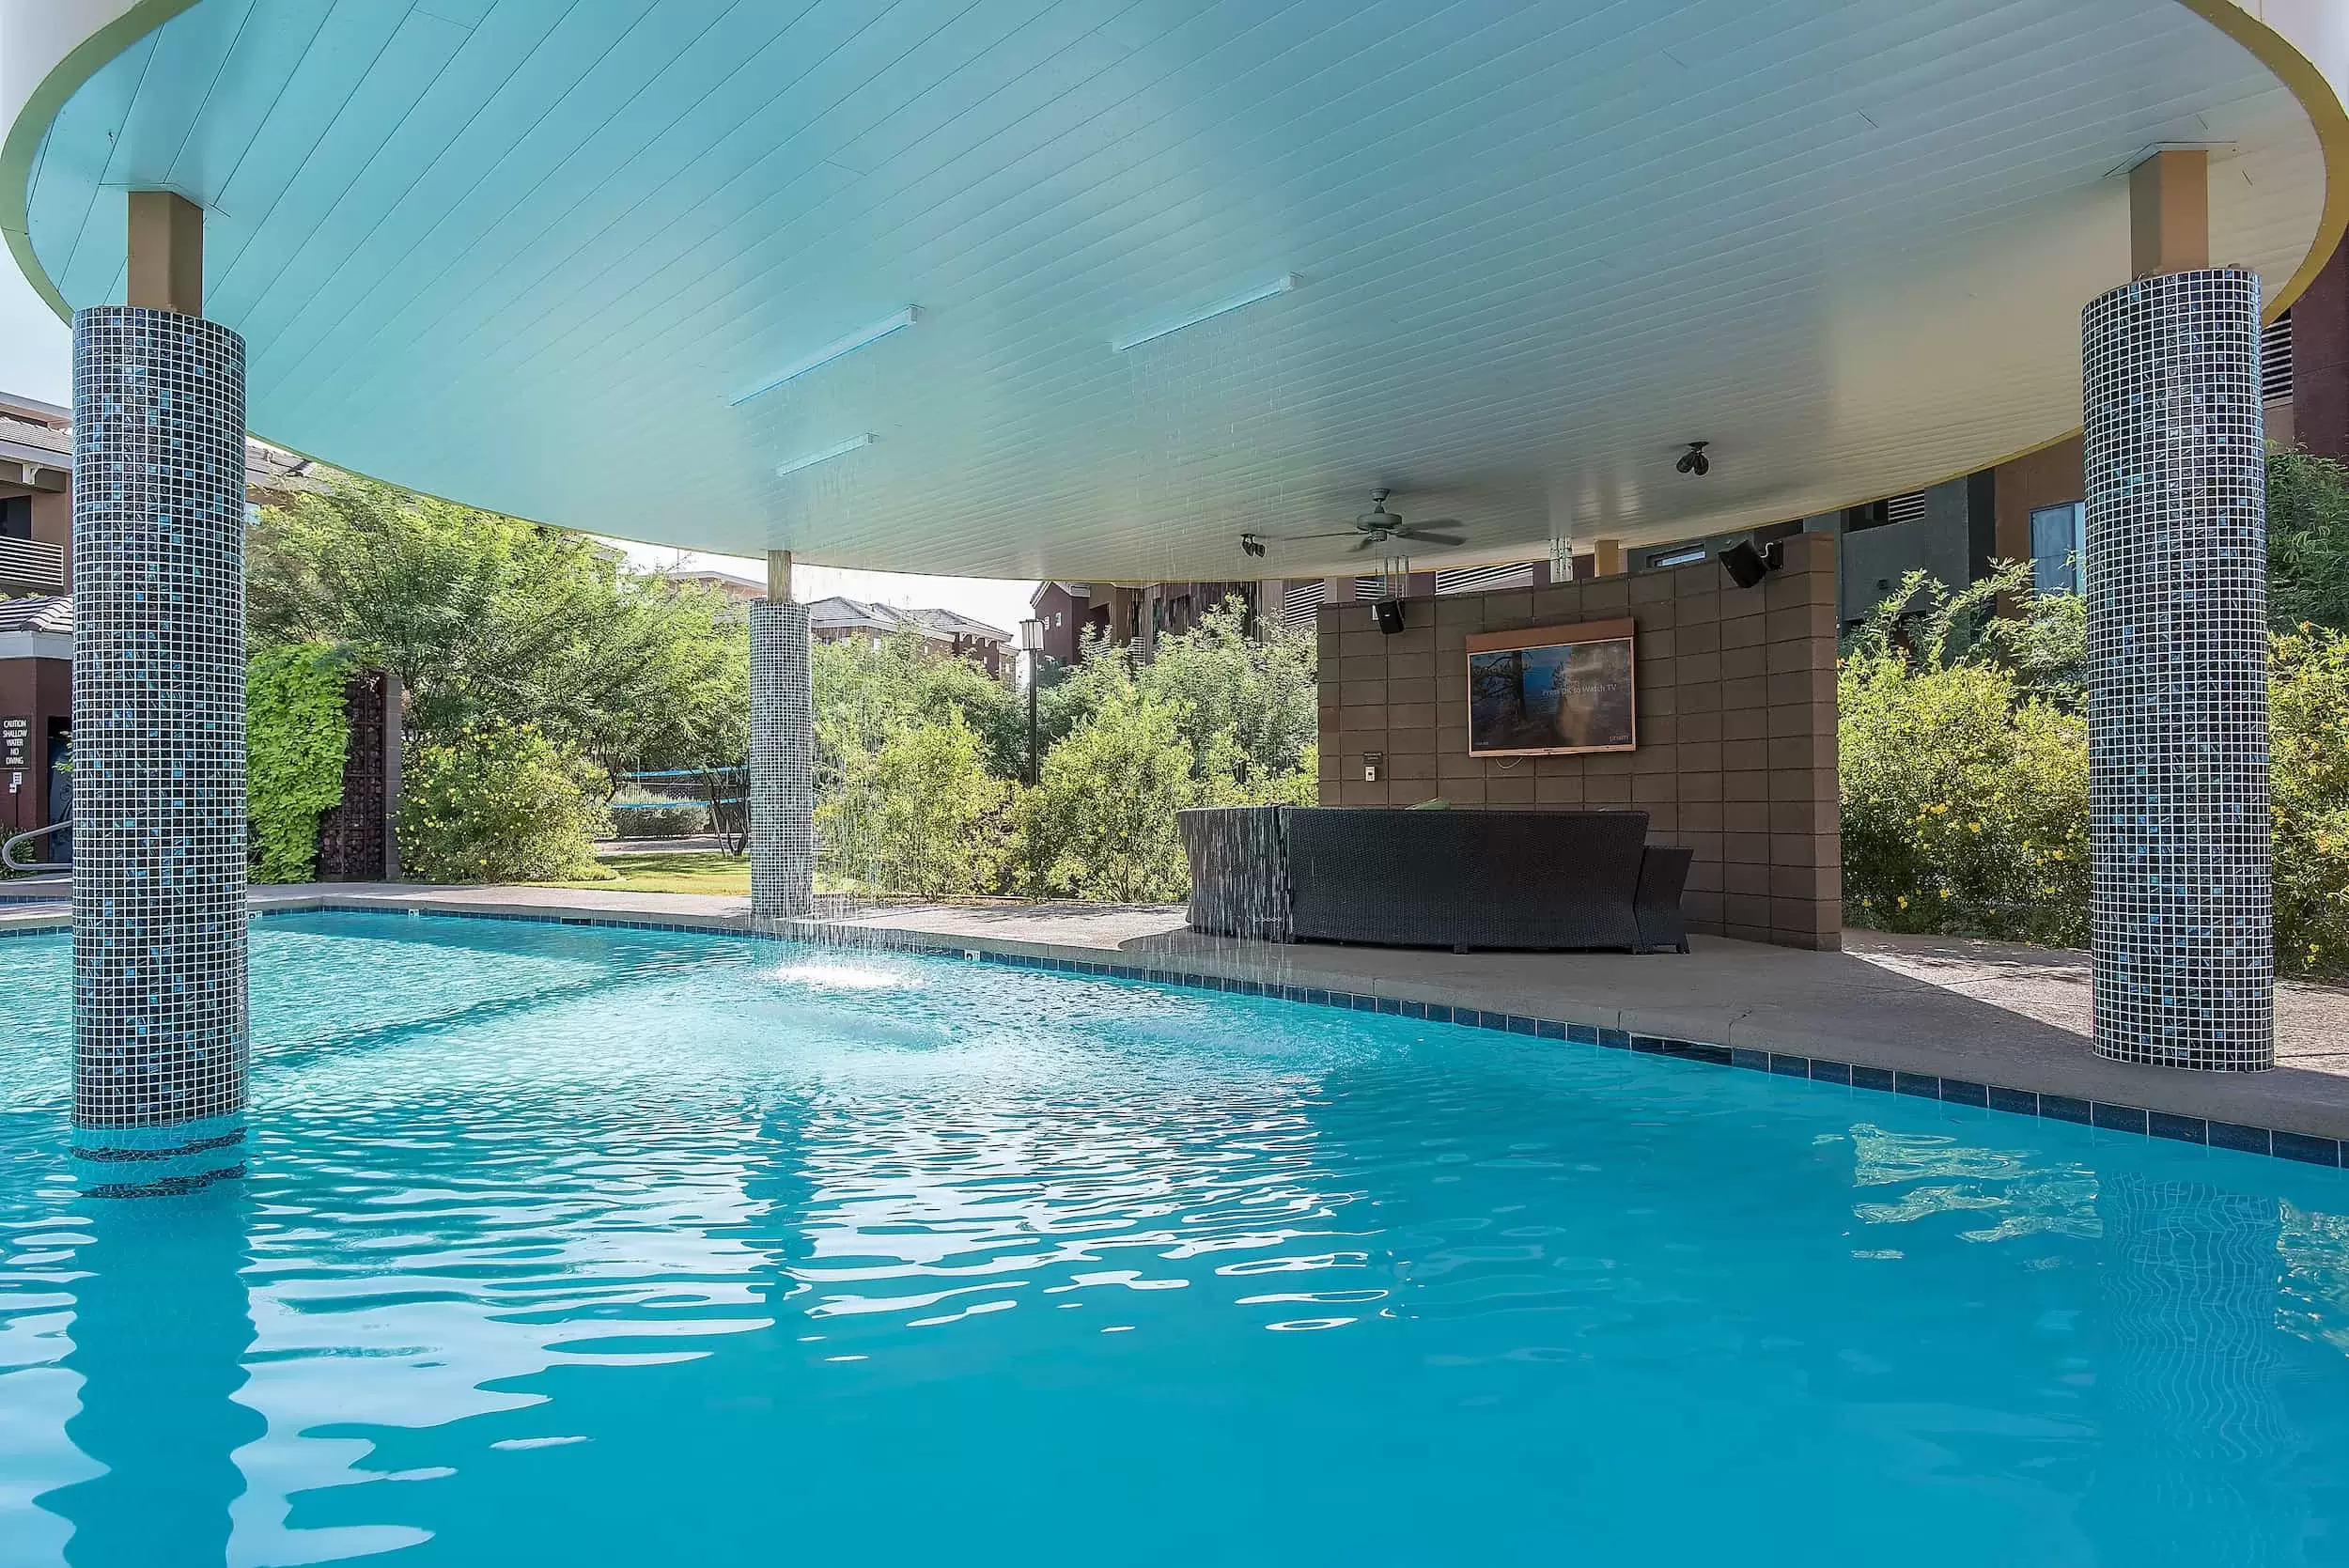 Water falls from overhead into the pool, beside that a couch sets in the shade in front of a large screen tv.